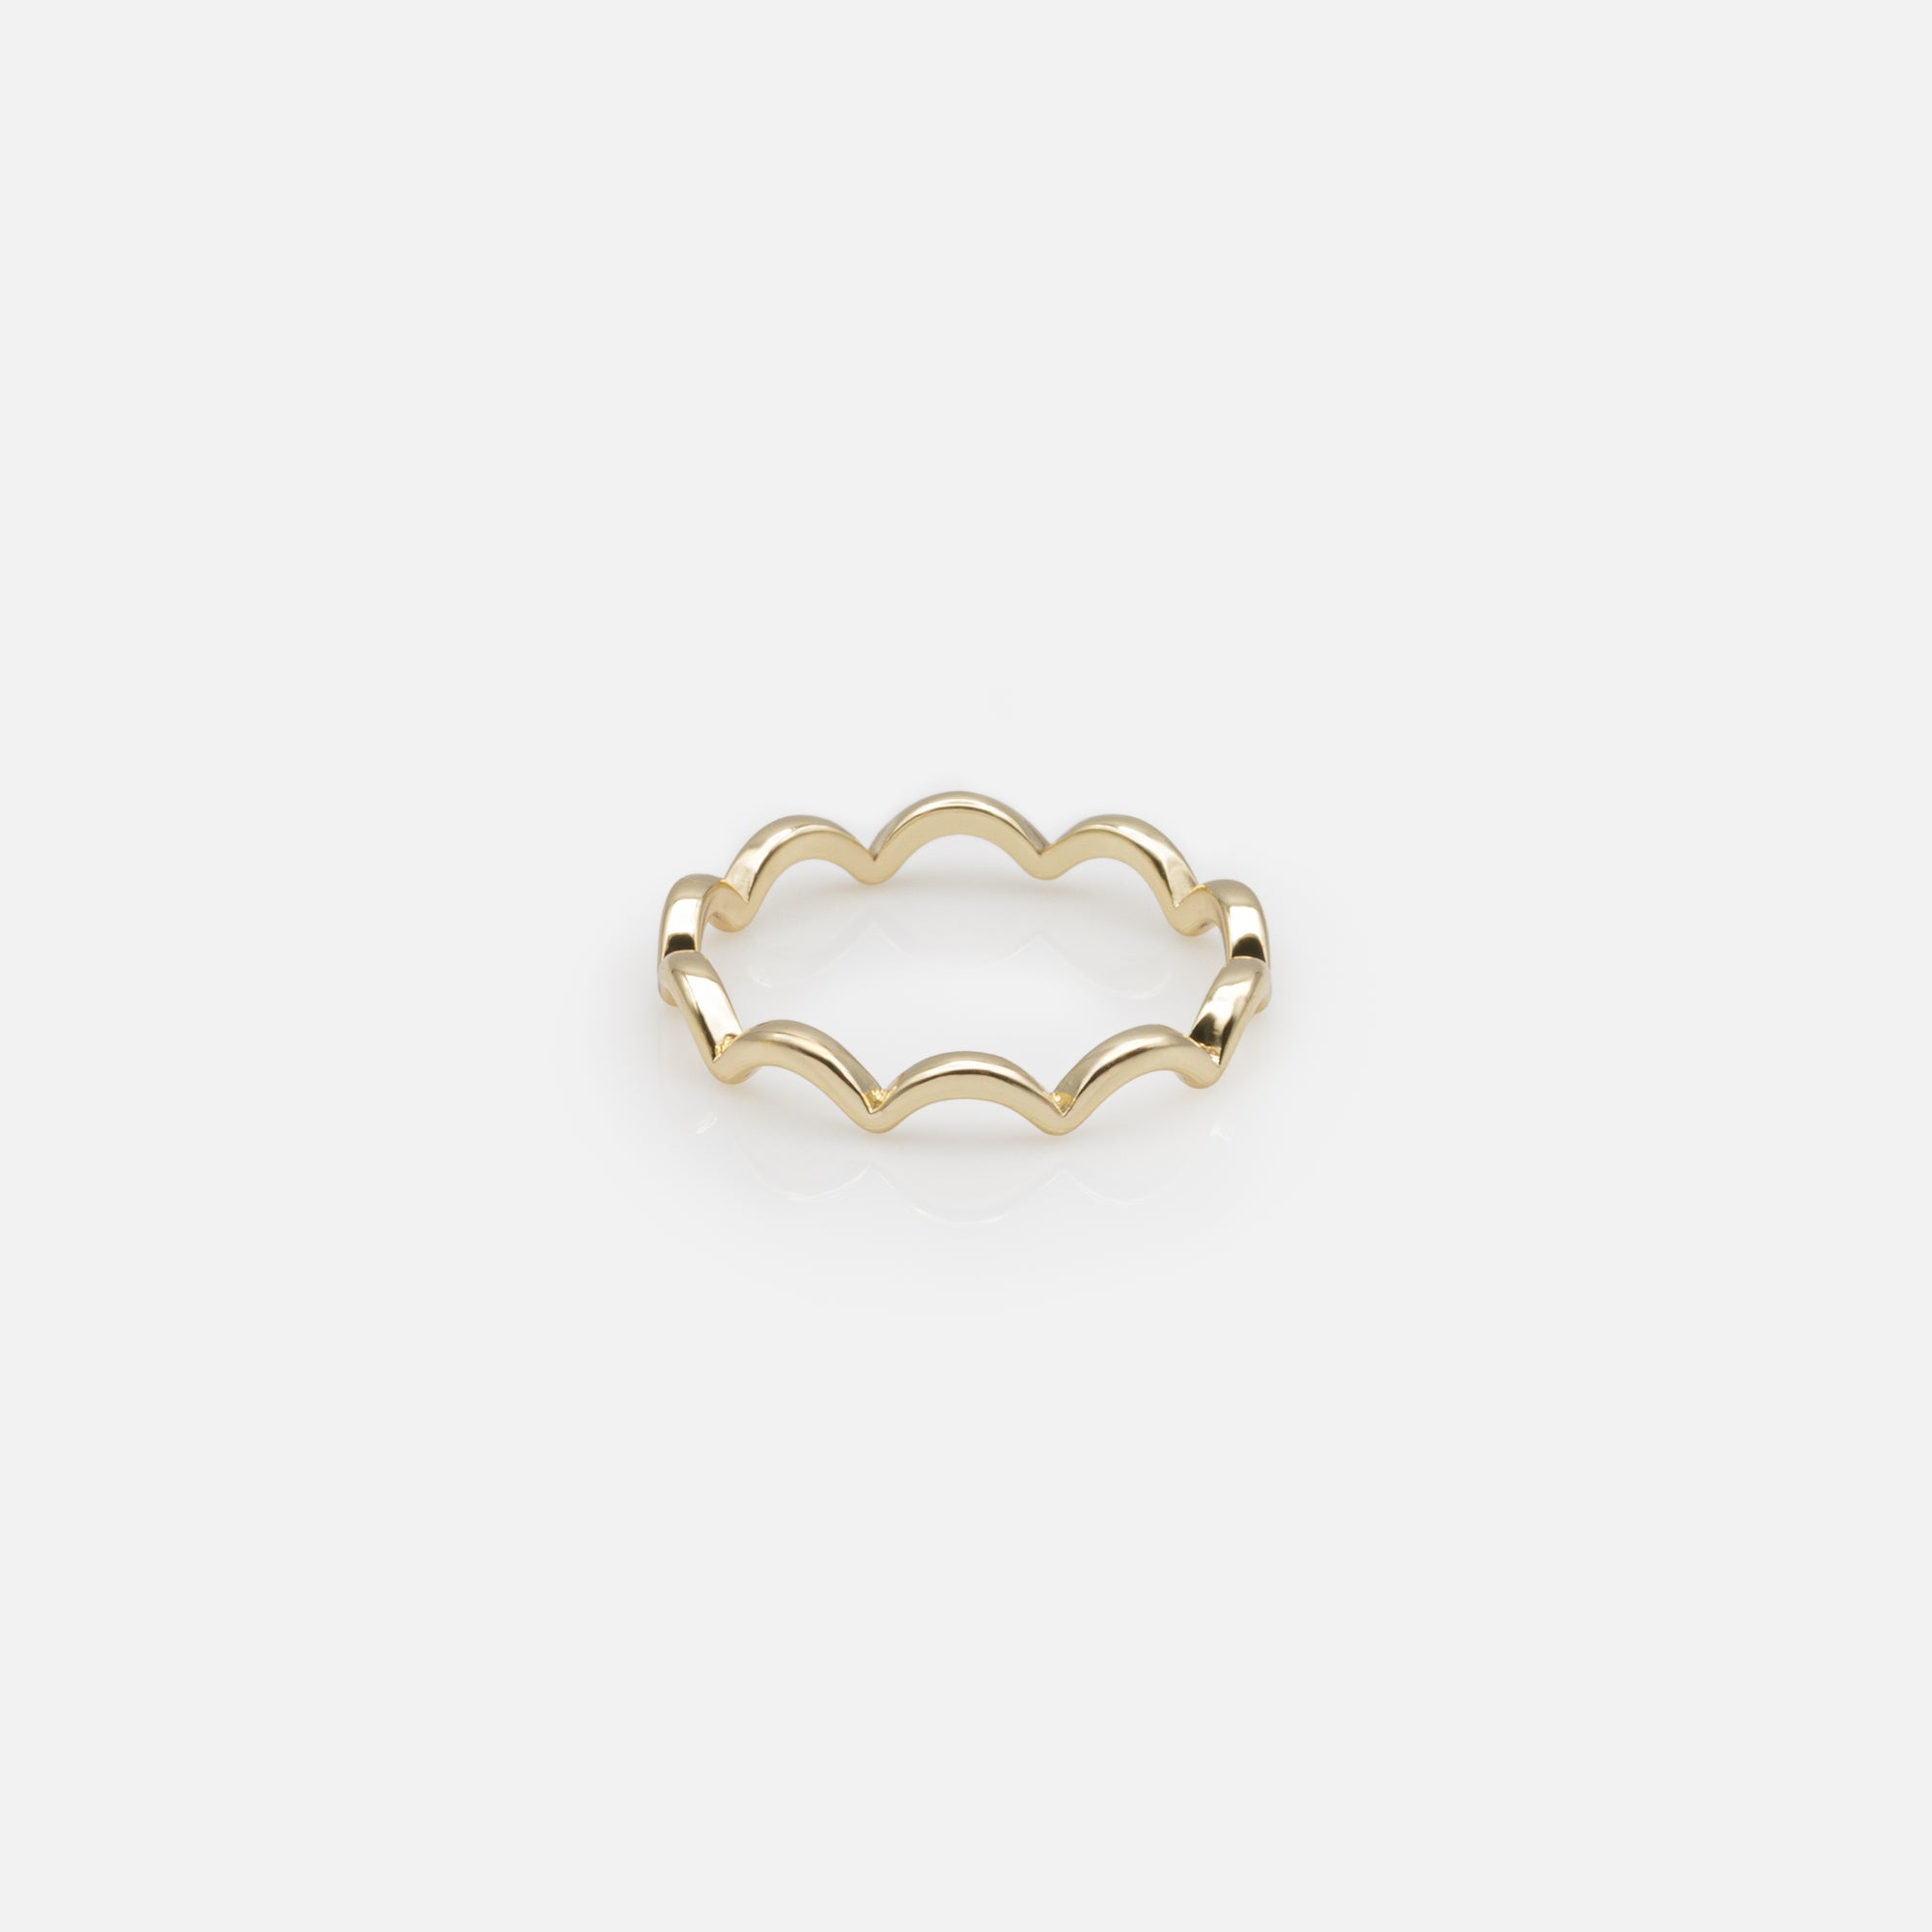 Duo of golden wave rings